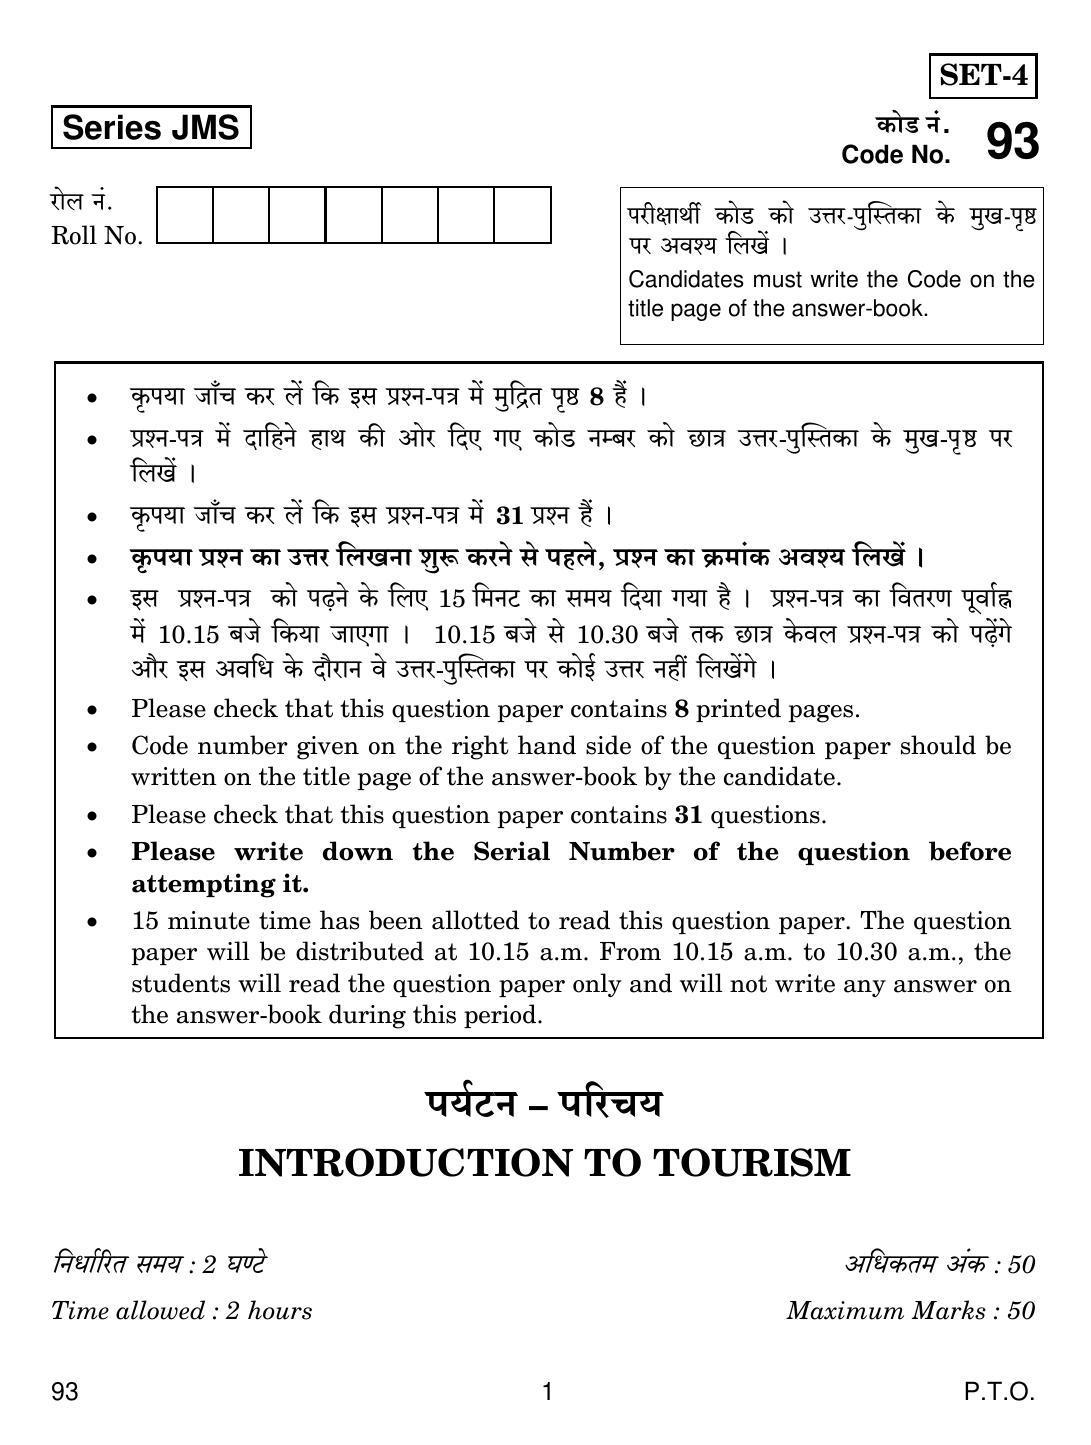 CBSE Class 10 93 INTRODUCTION TO TOURISM 2019 Question Paper - Page 1